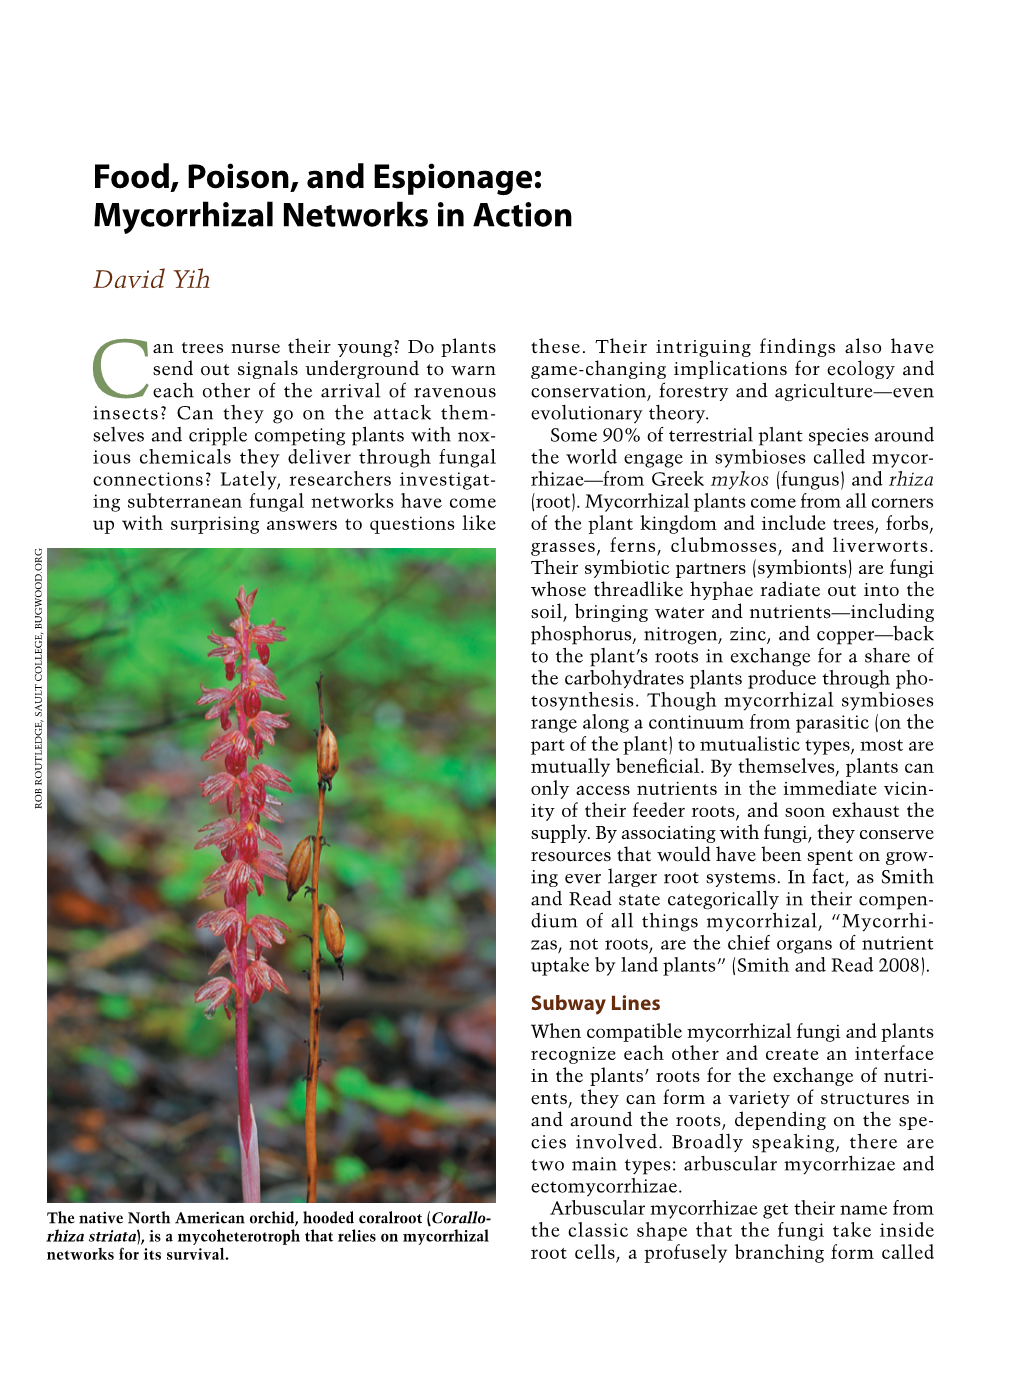 Food, Poison, and Espionage: Mycorrhizal Networks in Action